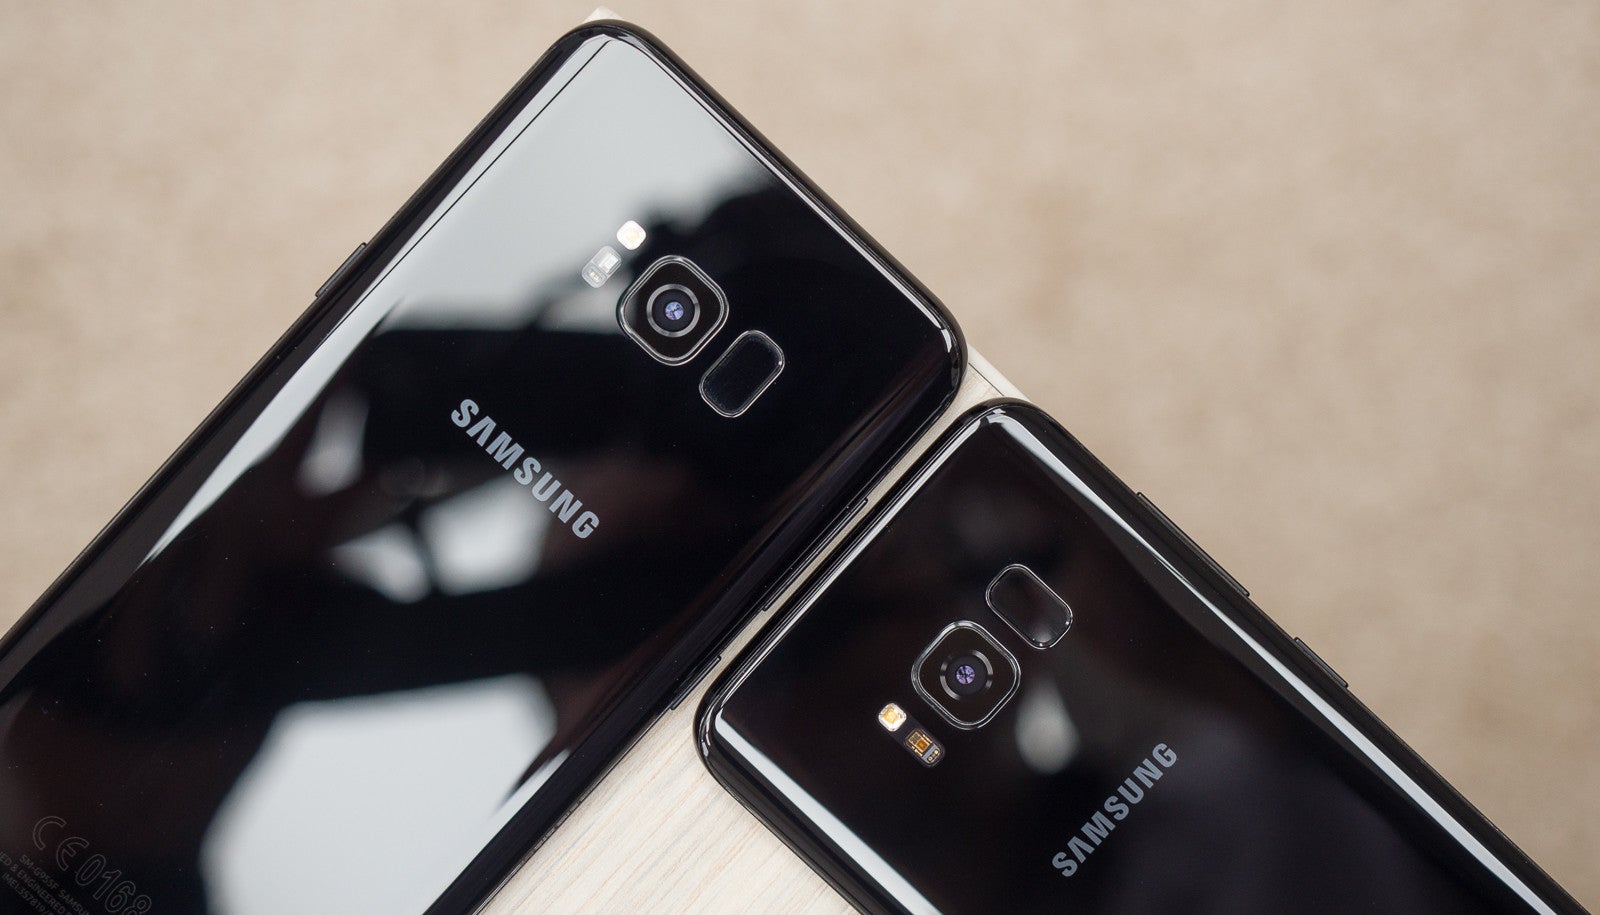 Sprint rolls out CallingPLUS, new messaging features to Samsung Galaxy S8 and S8+